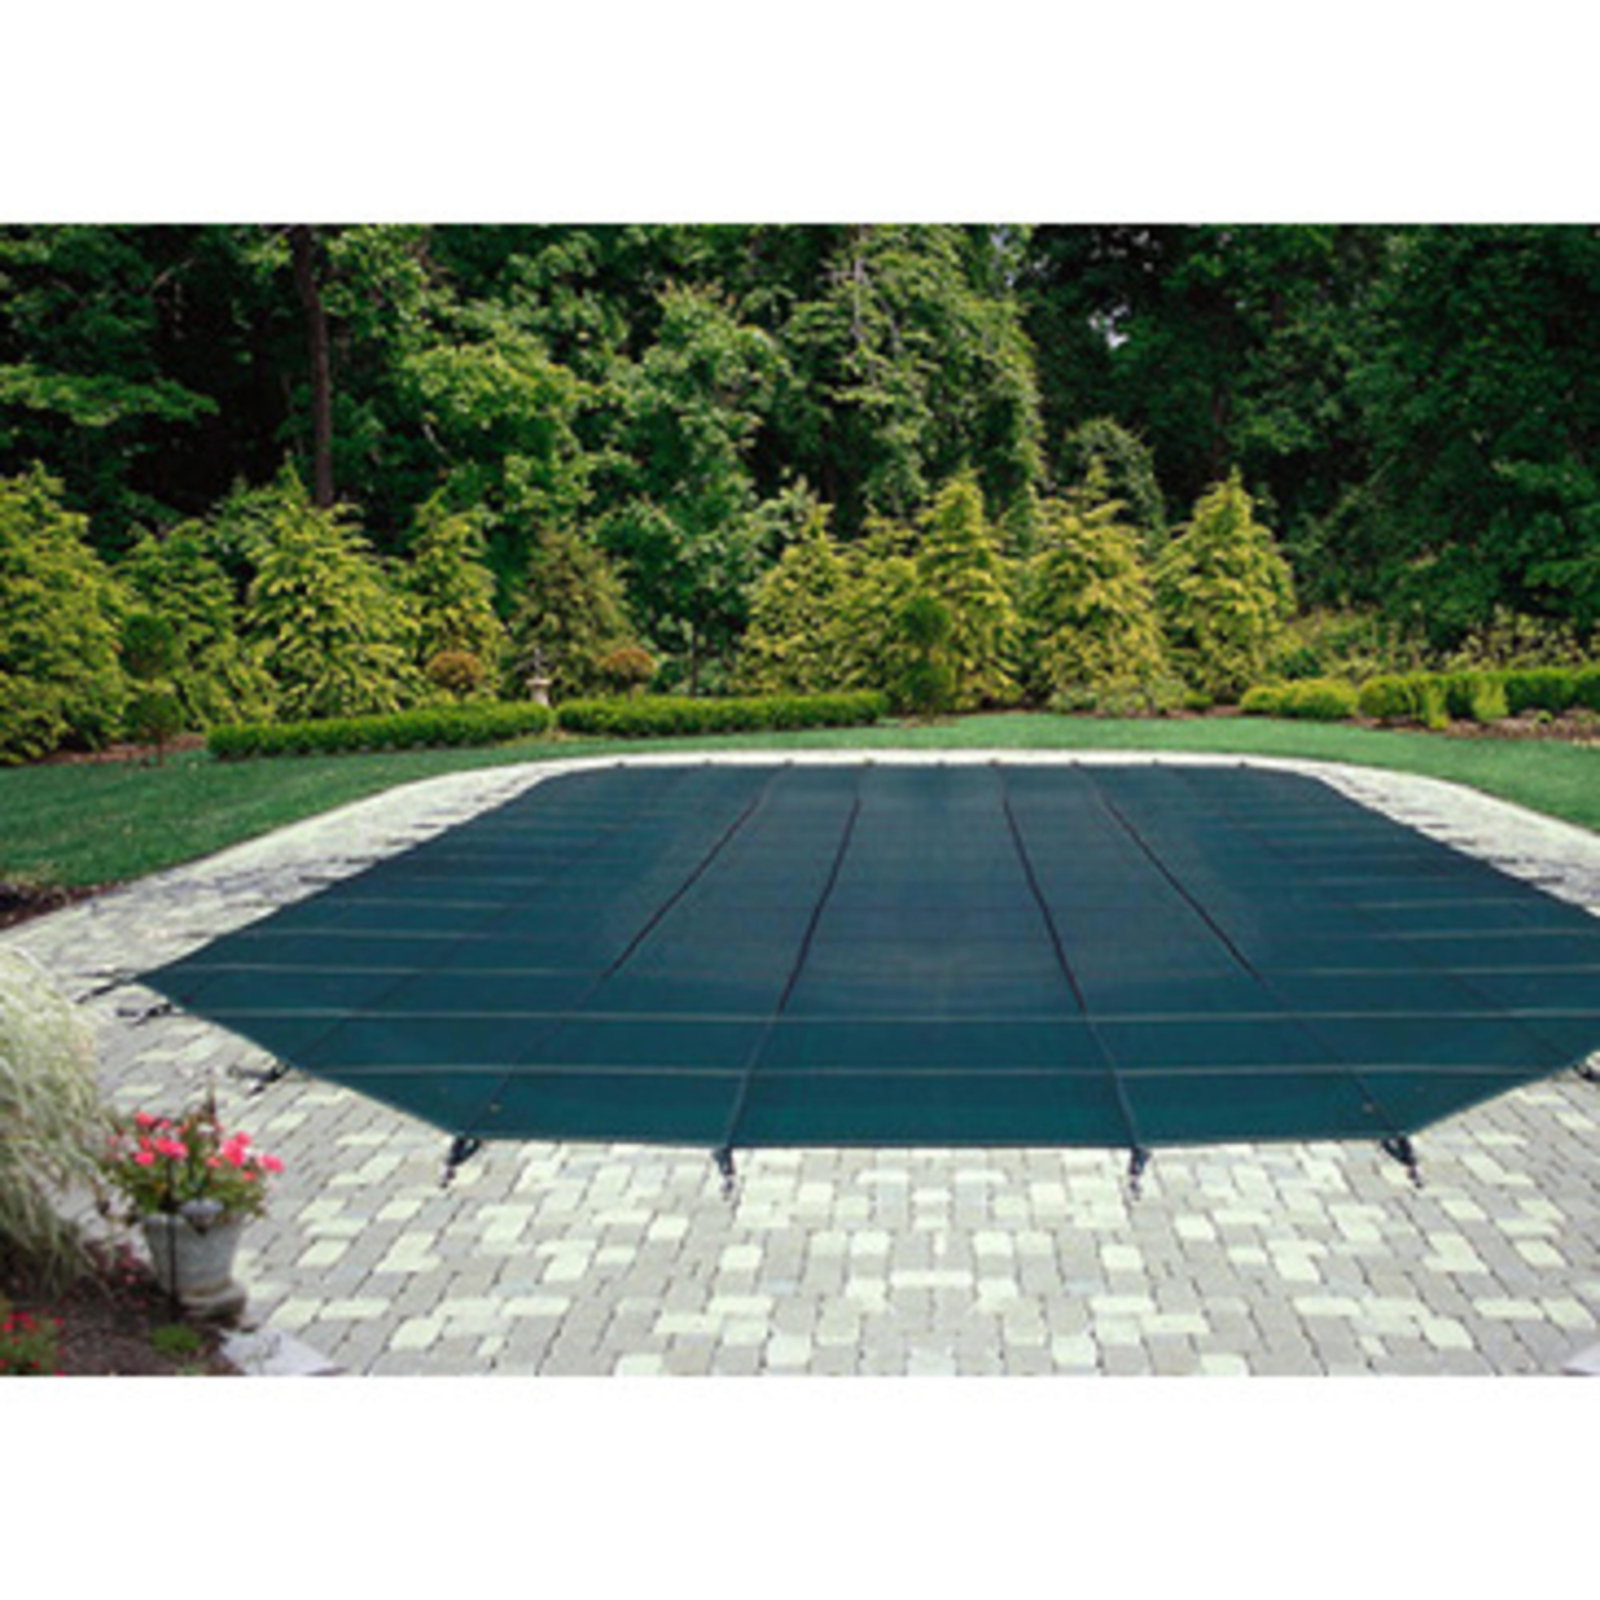 Blue Wave 18' x 36' Rectangular Mesh Safety for In-Ground Pools - Blue